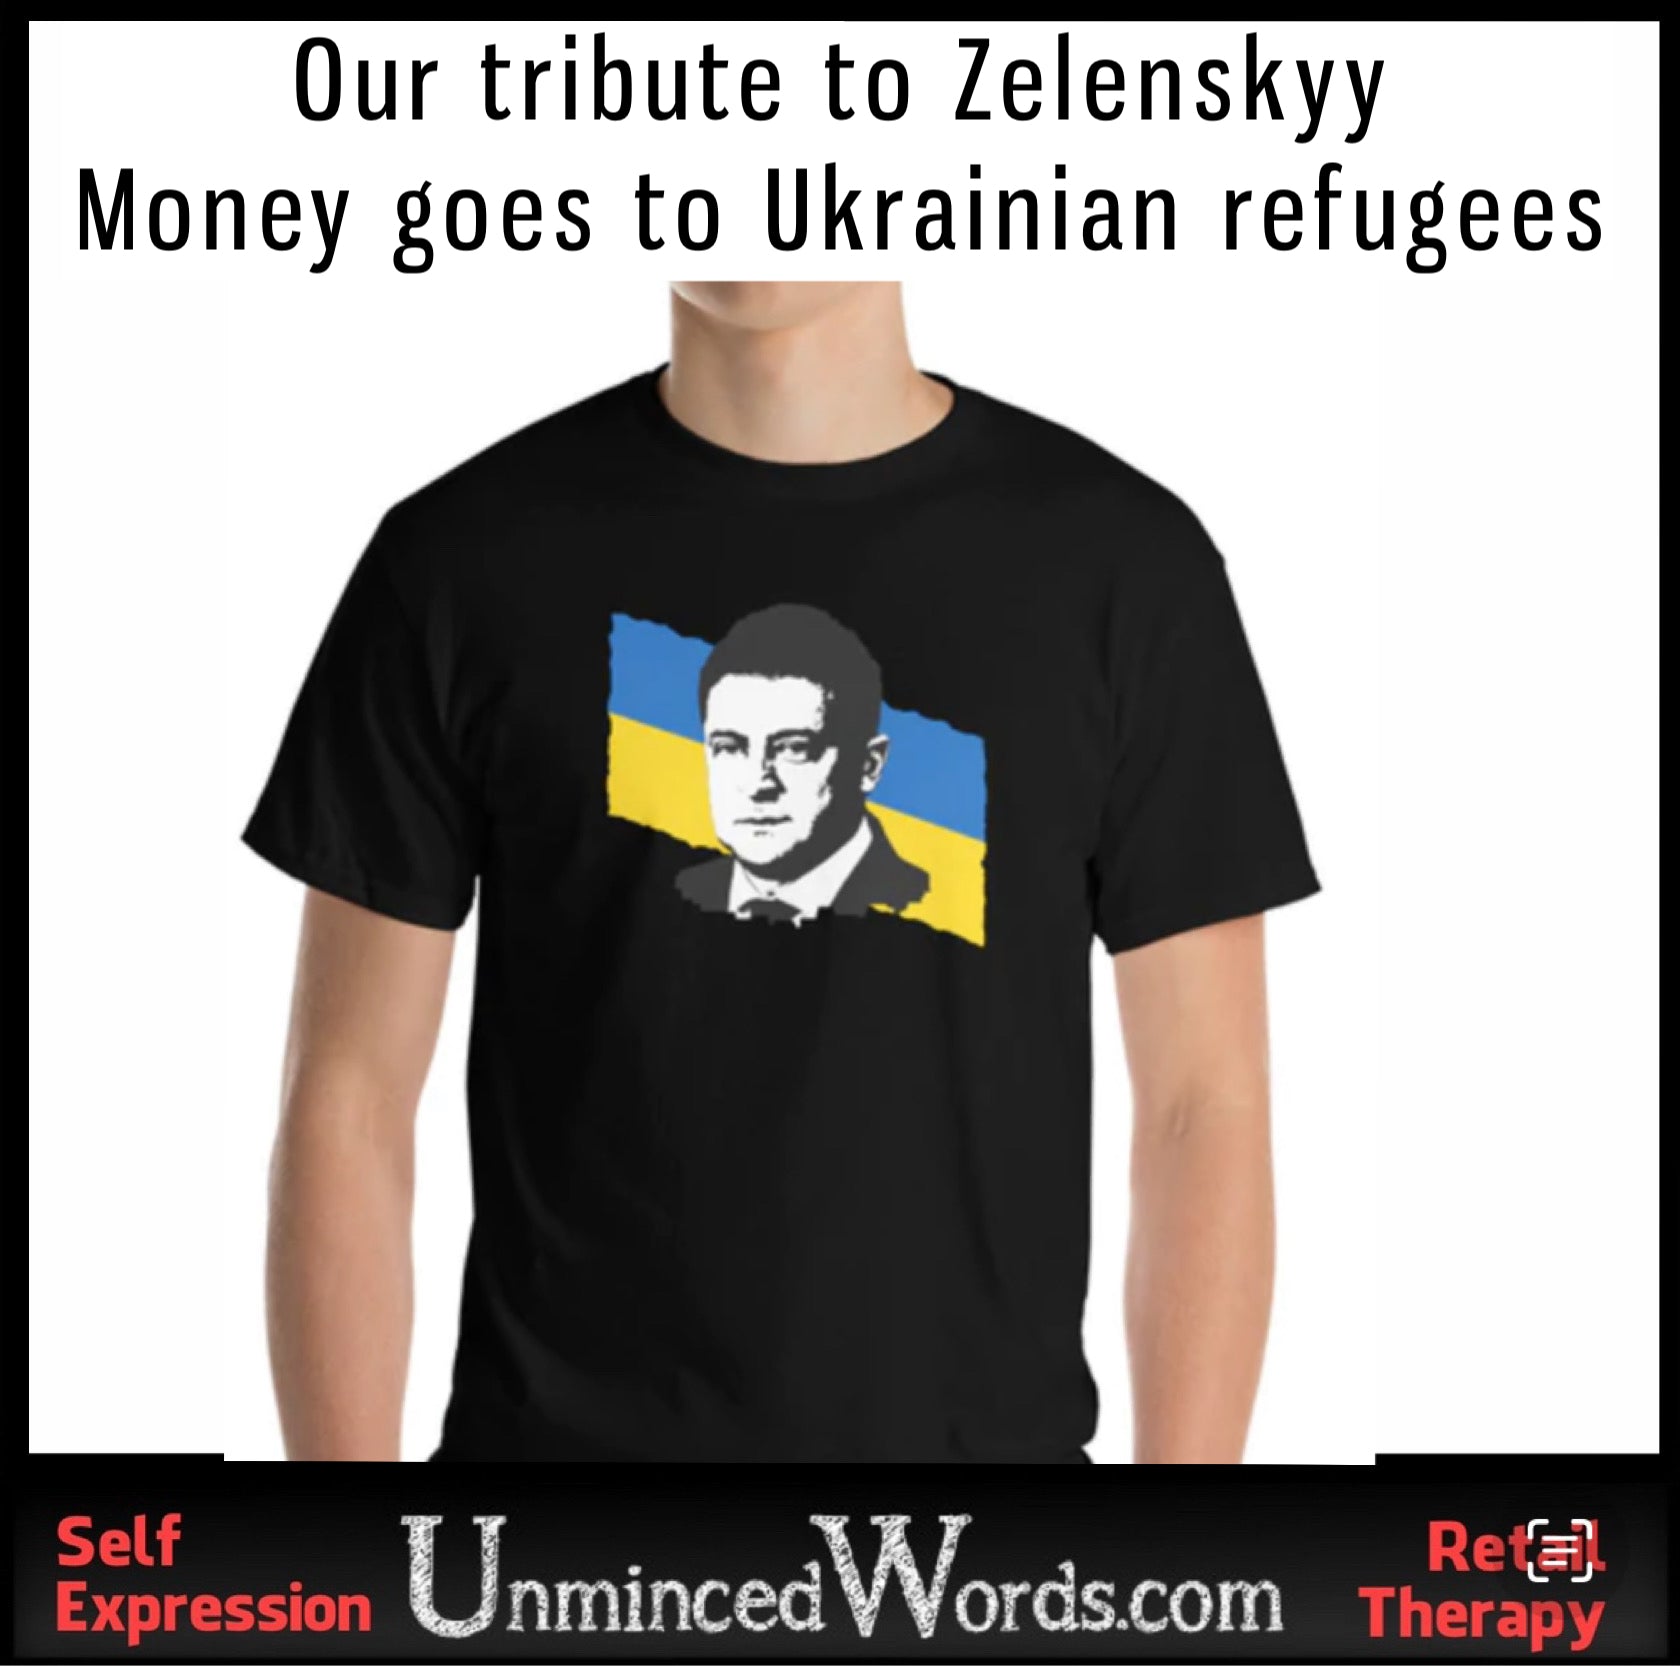 Our tribute to Zelenskyy.